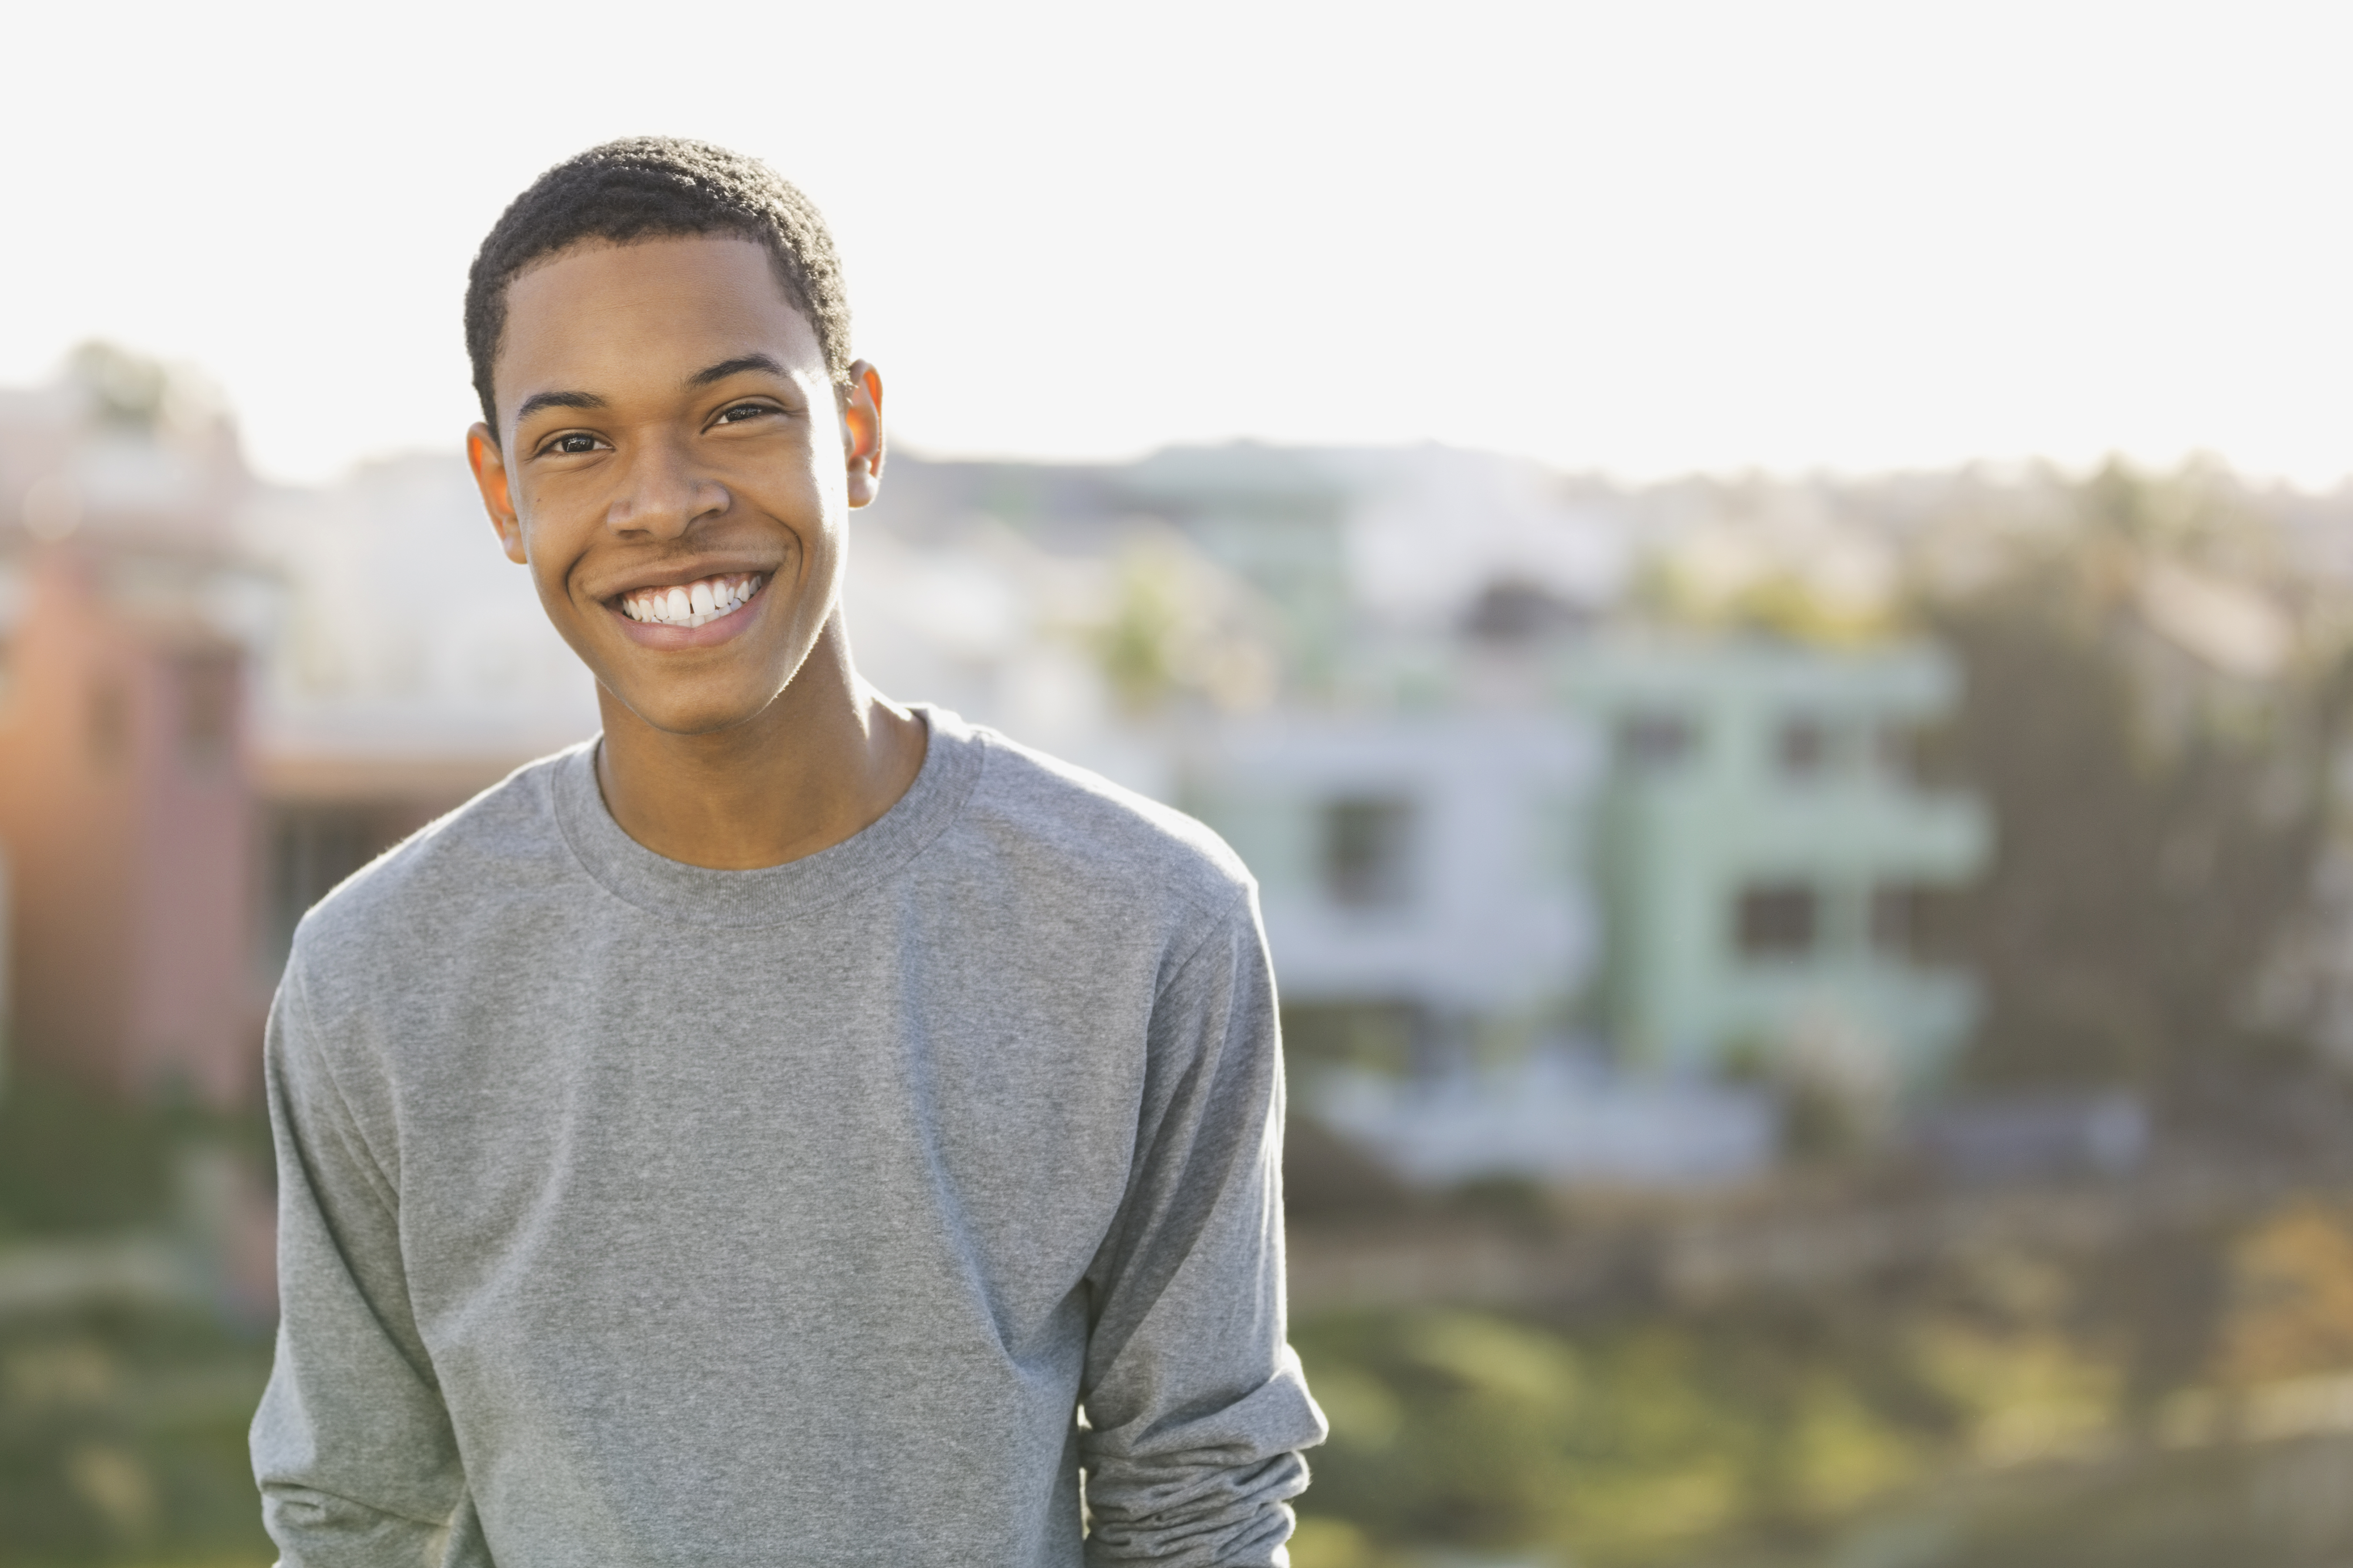 Black teenager in a gray t-shirt smiling and looking directly at the camera.